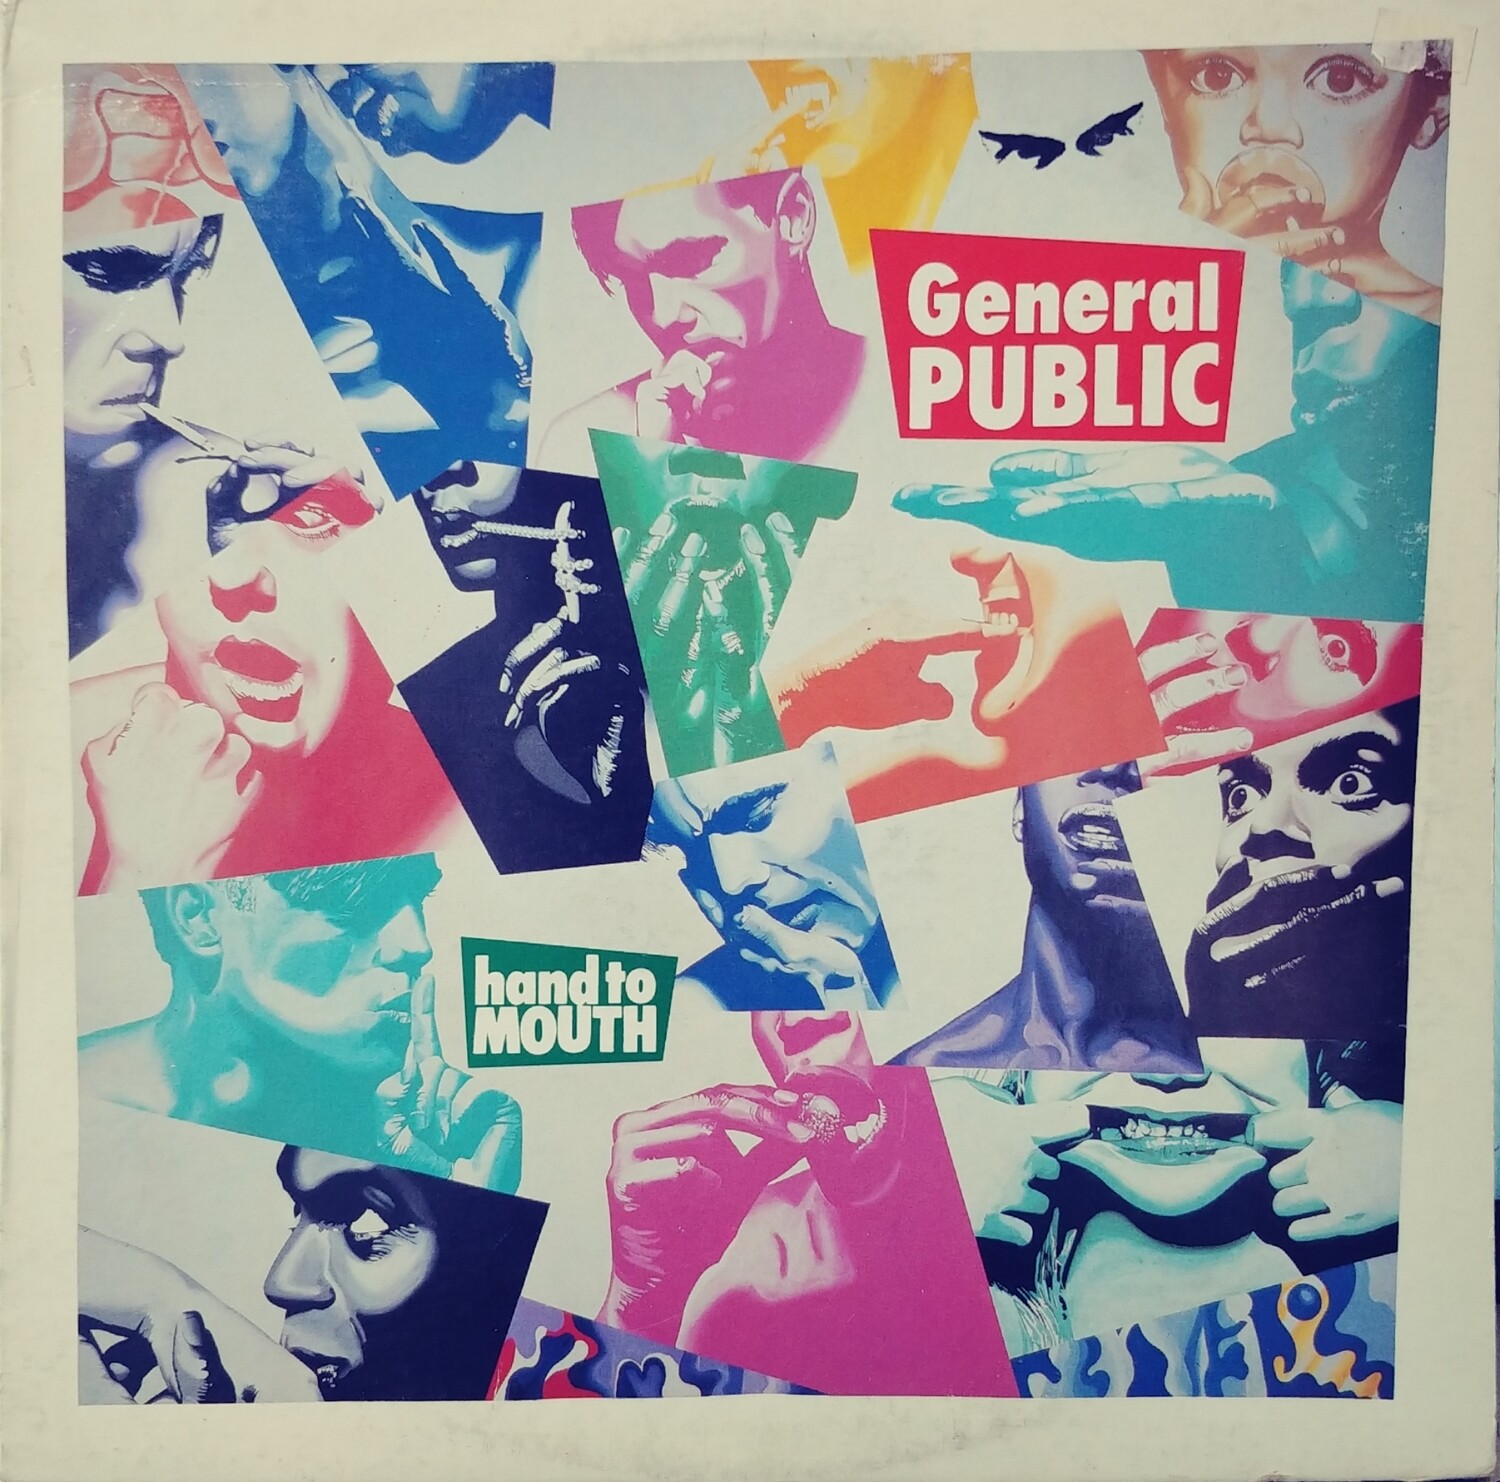 General Public - Hand to mouth